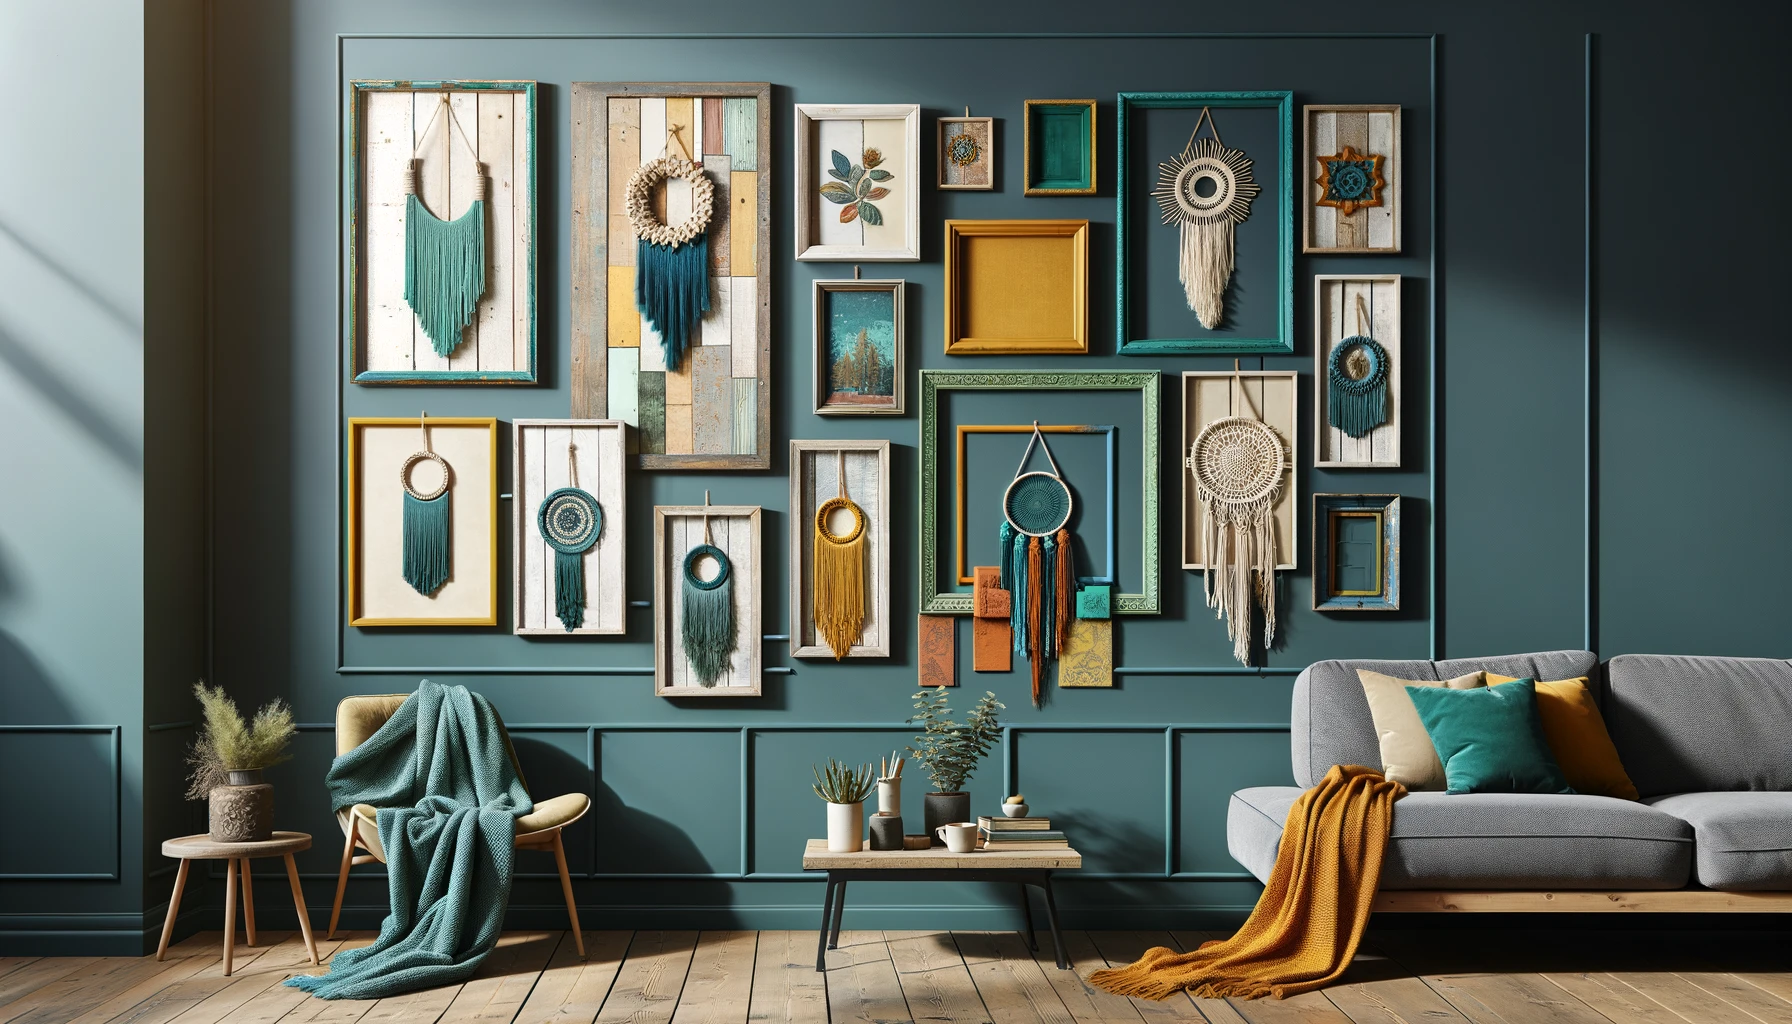 Here's an image showcasing a stylish interior wall decorated with a collection of repurposed vintage frames. These frames, painted in vibrant colors like teal and mustard, some distressed to show the original wood, serve as unique backdrops for macramé and cool fabrics. The eclectic gallery wall complements the modern furnishings of the room, enhancing its overall aesthetic.